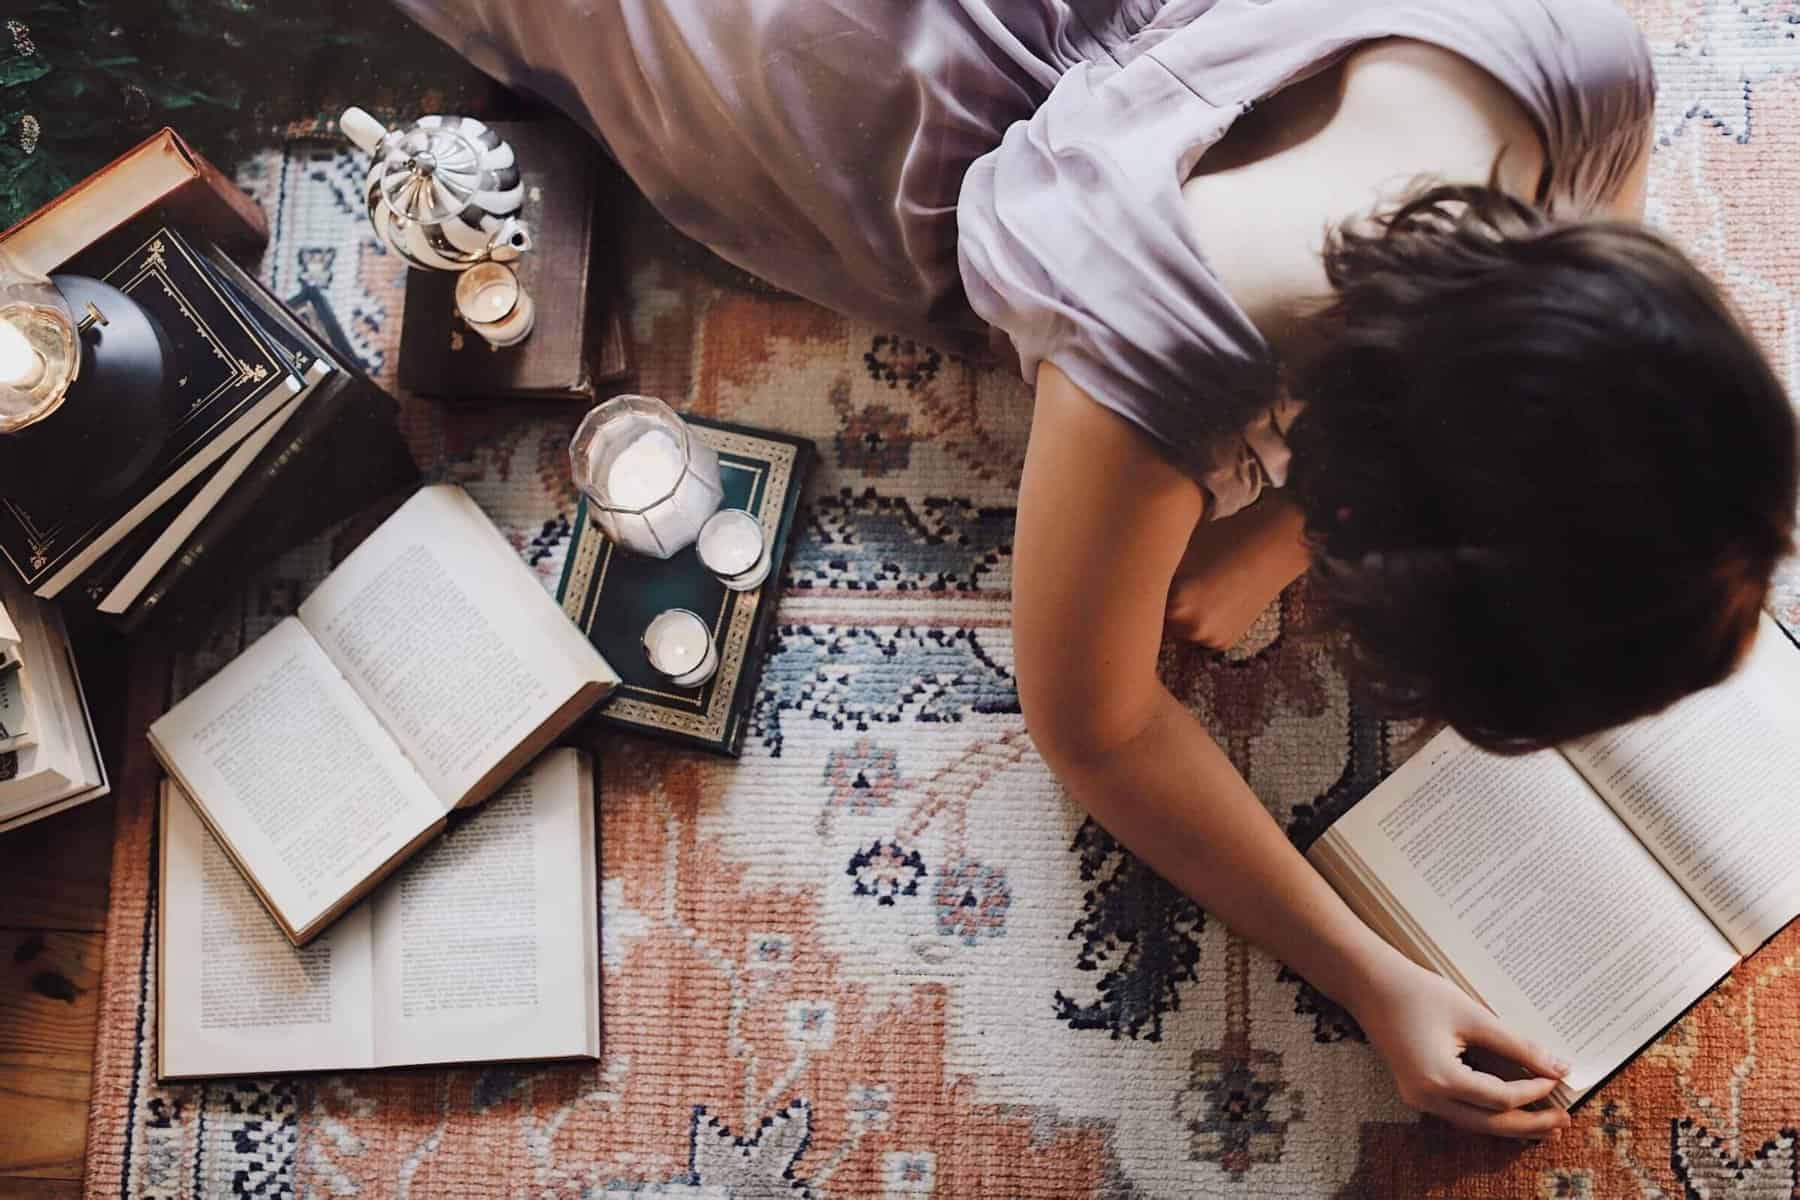 Girl reading surrounded by books